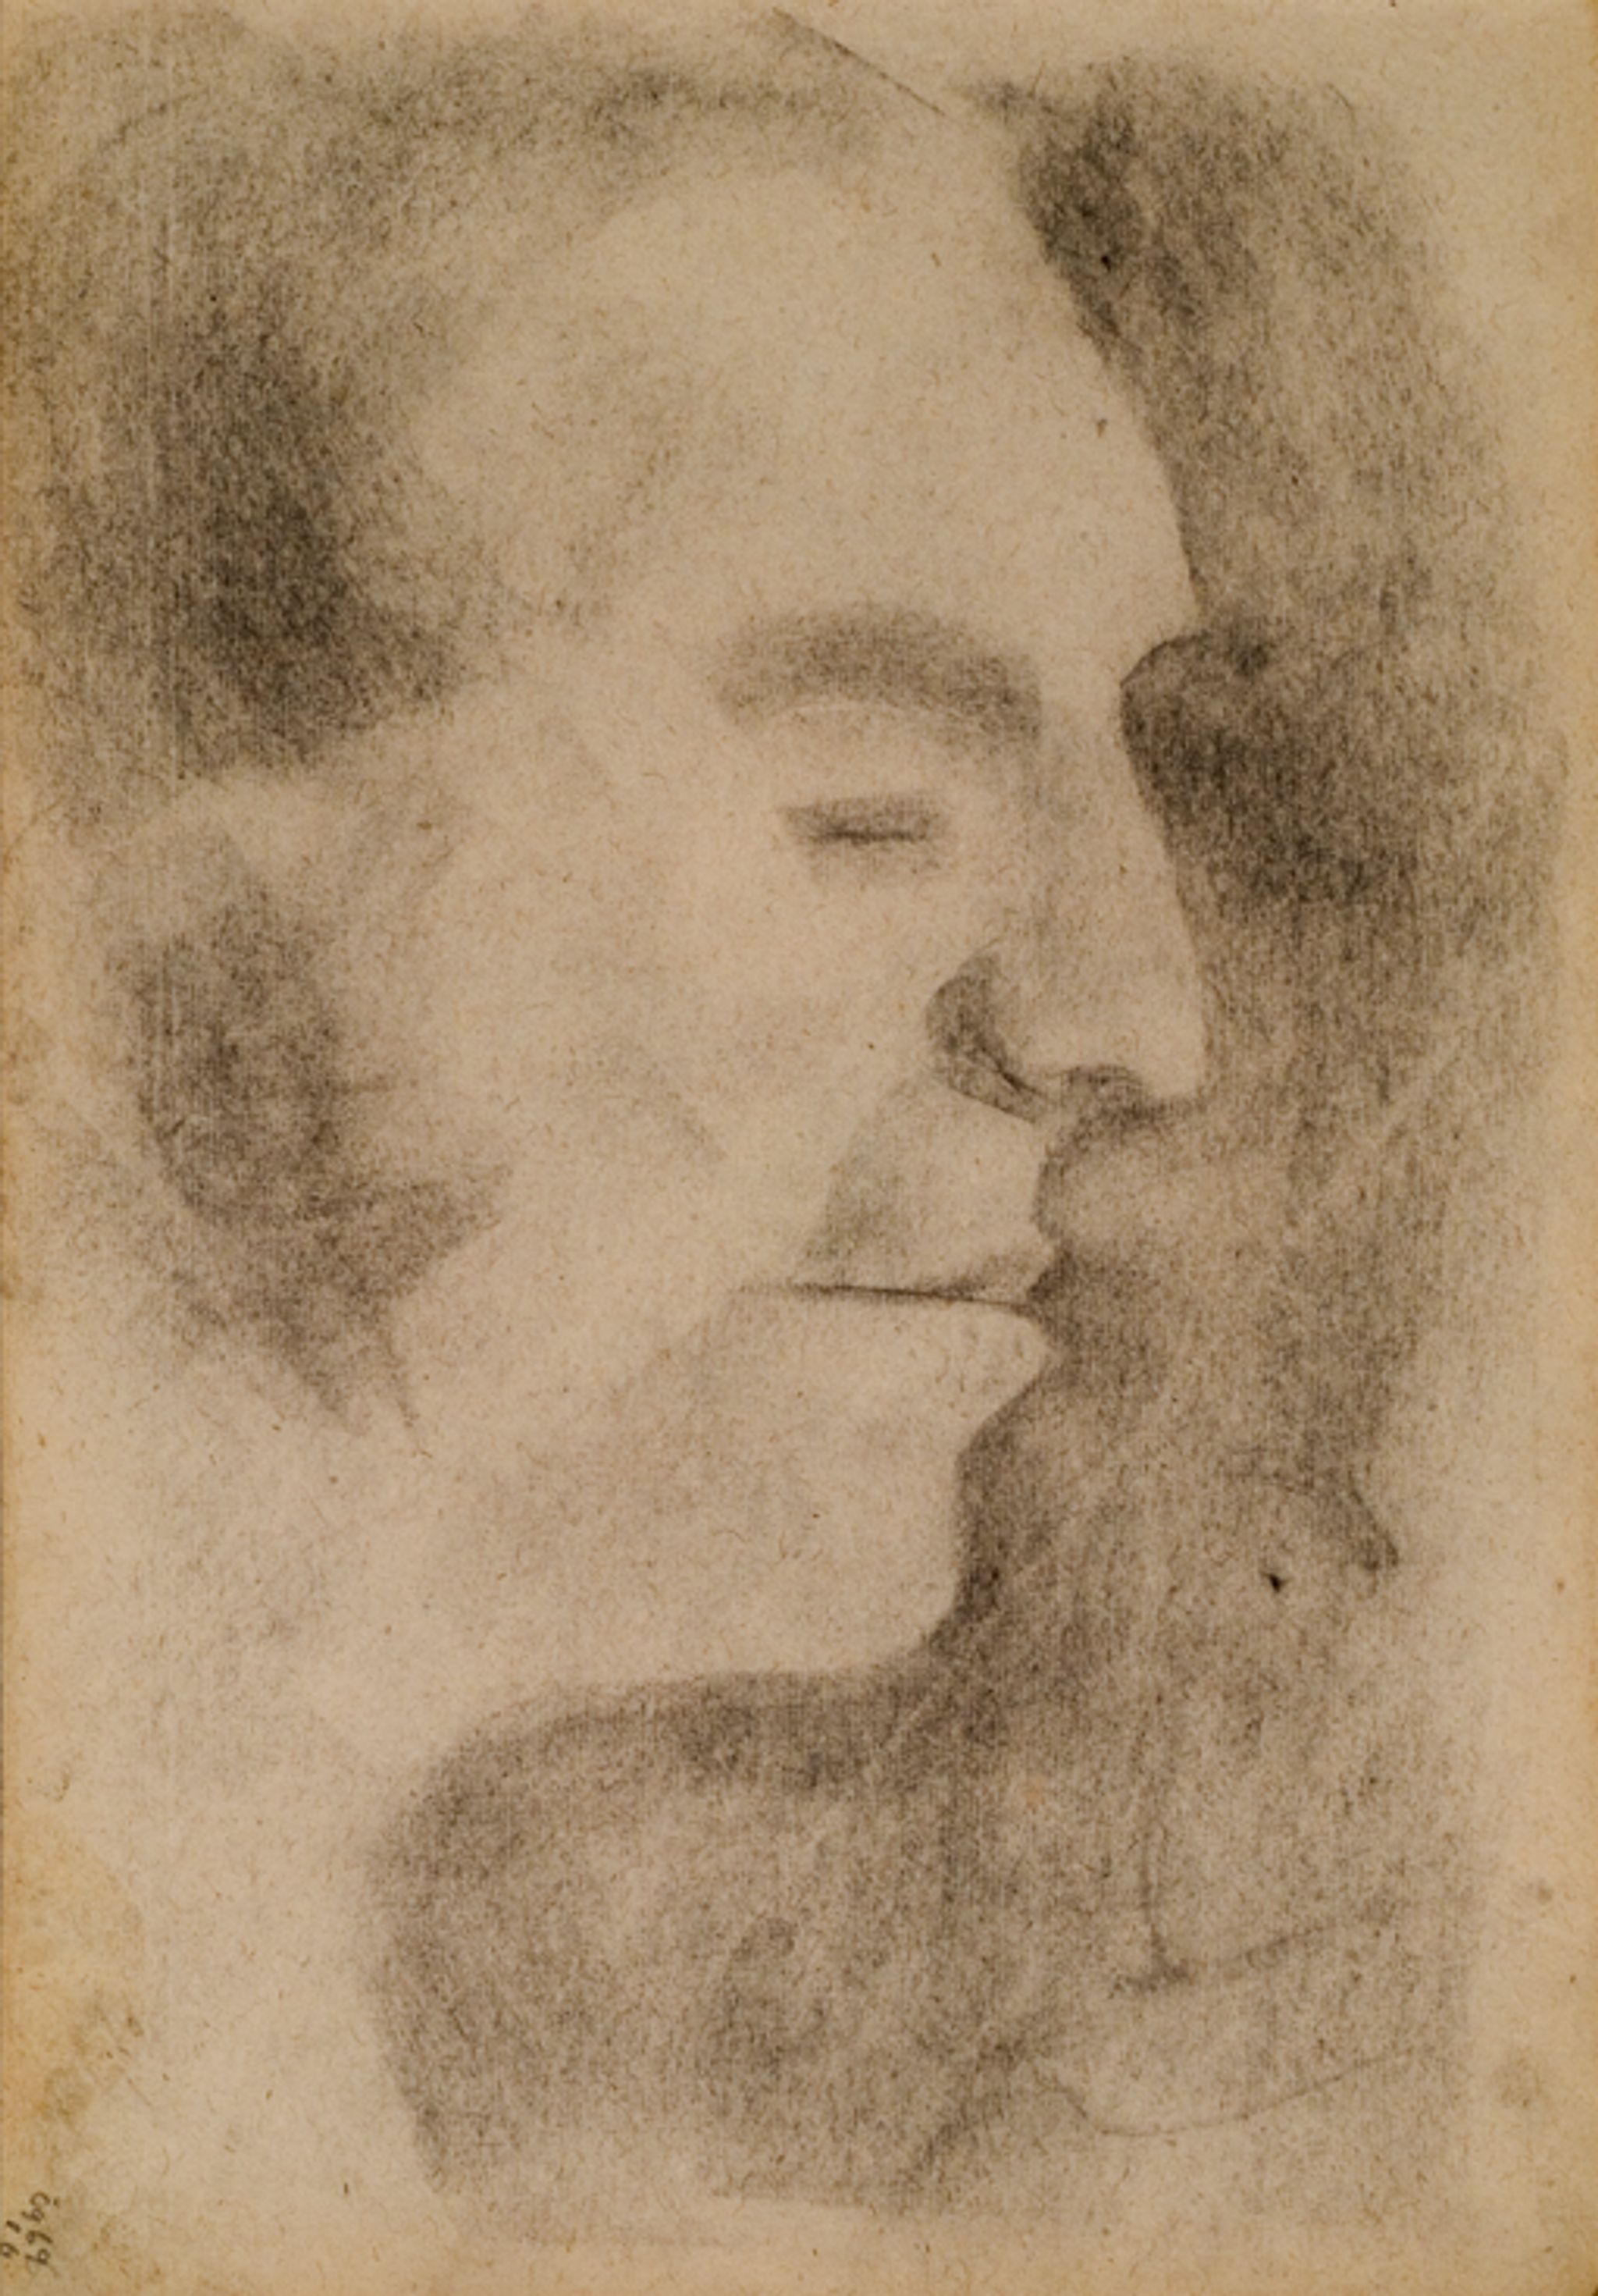 Image for: Portrait of a Man